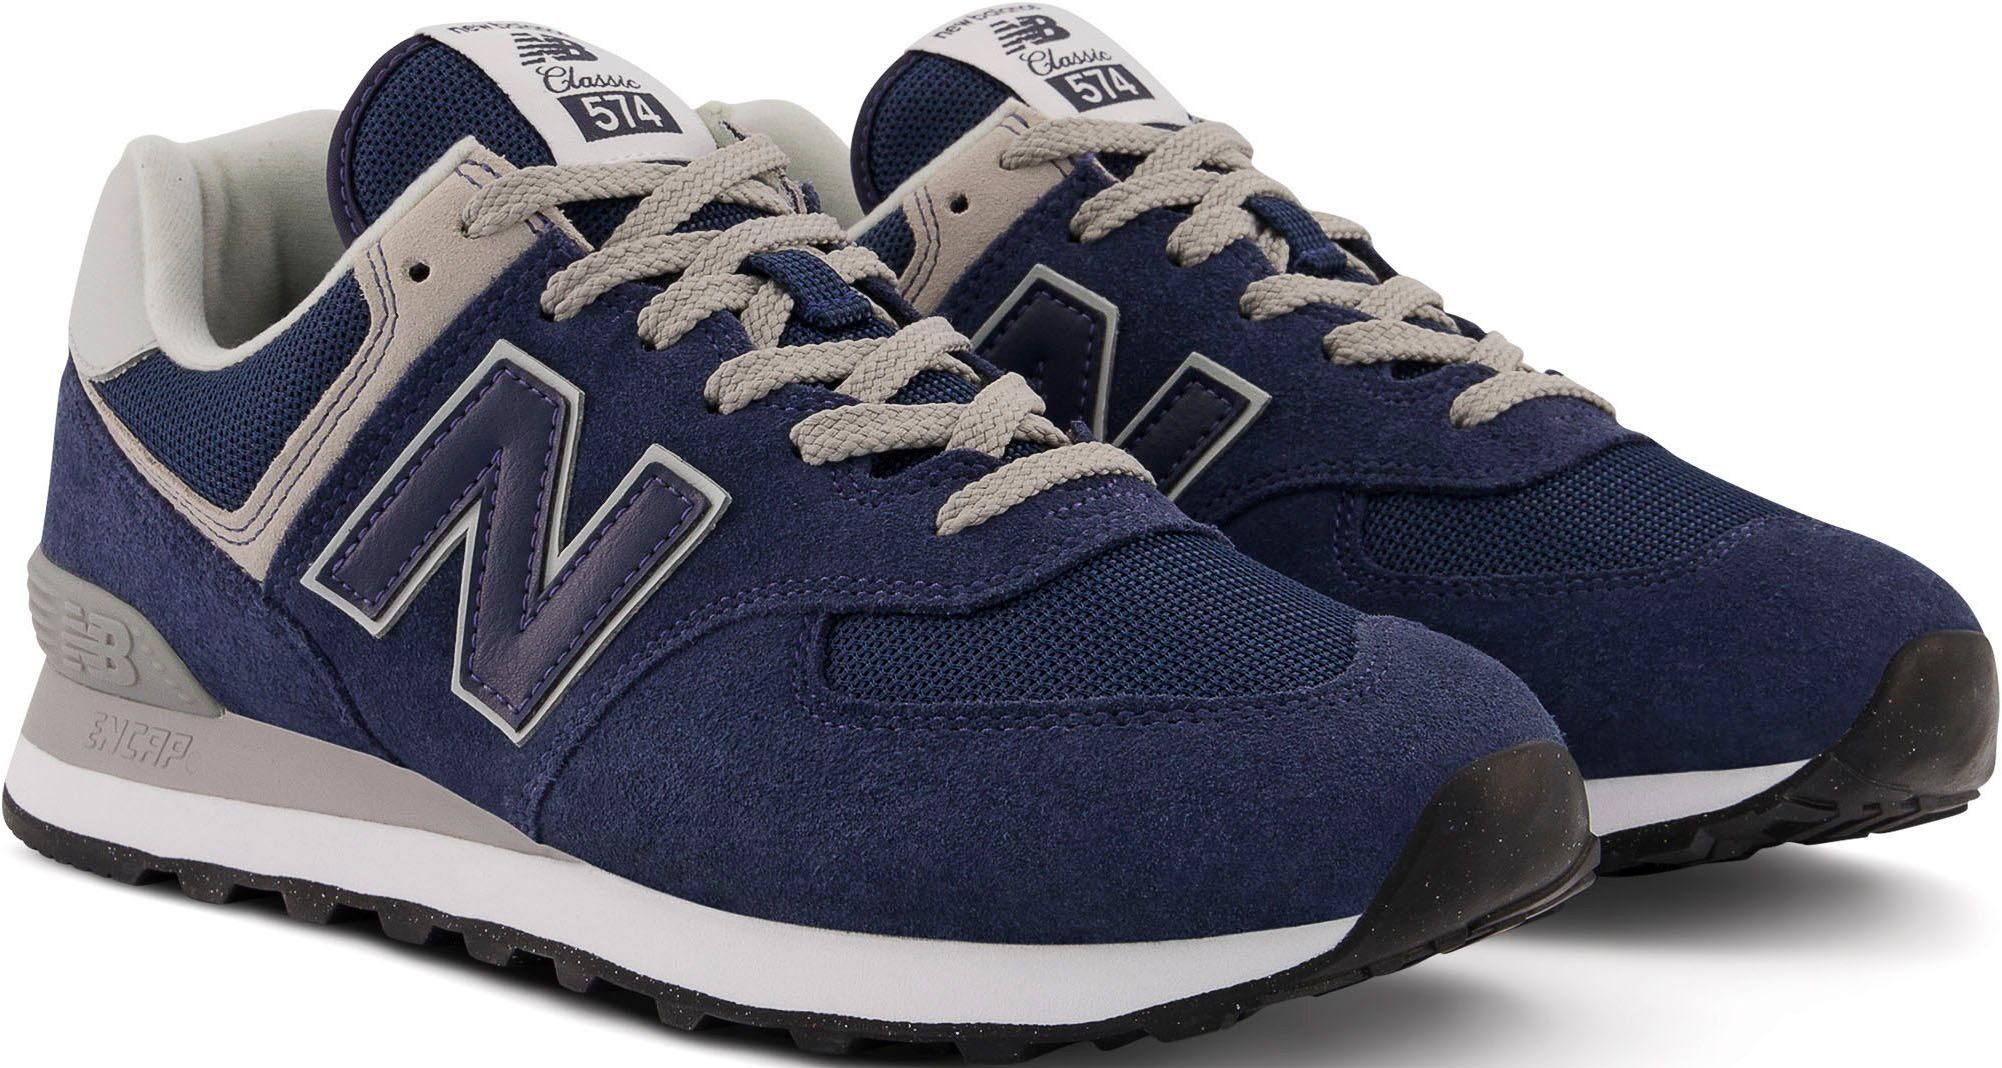 New Balance 574 Sneakers Low Sneaker, Laufsohle: Sonstiges Material